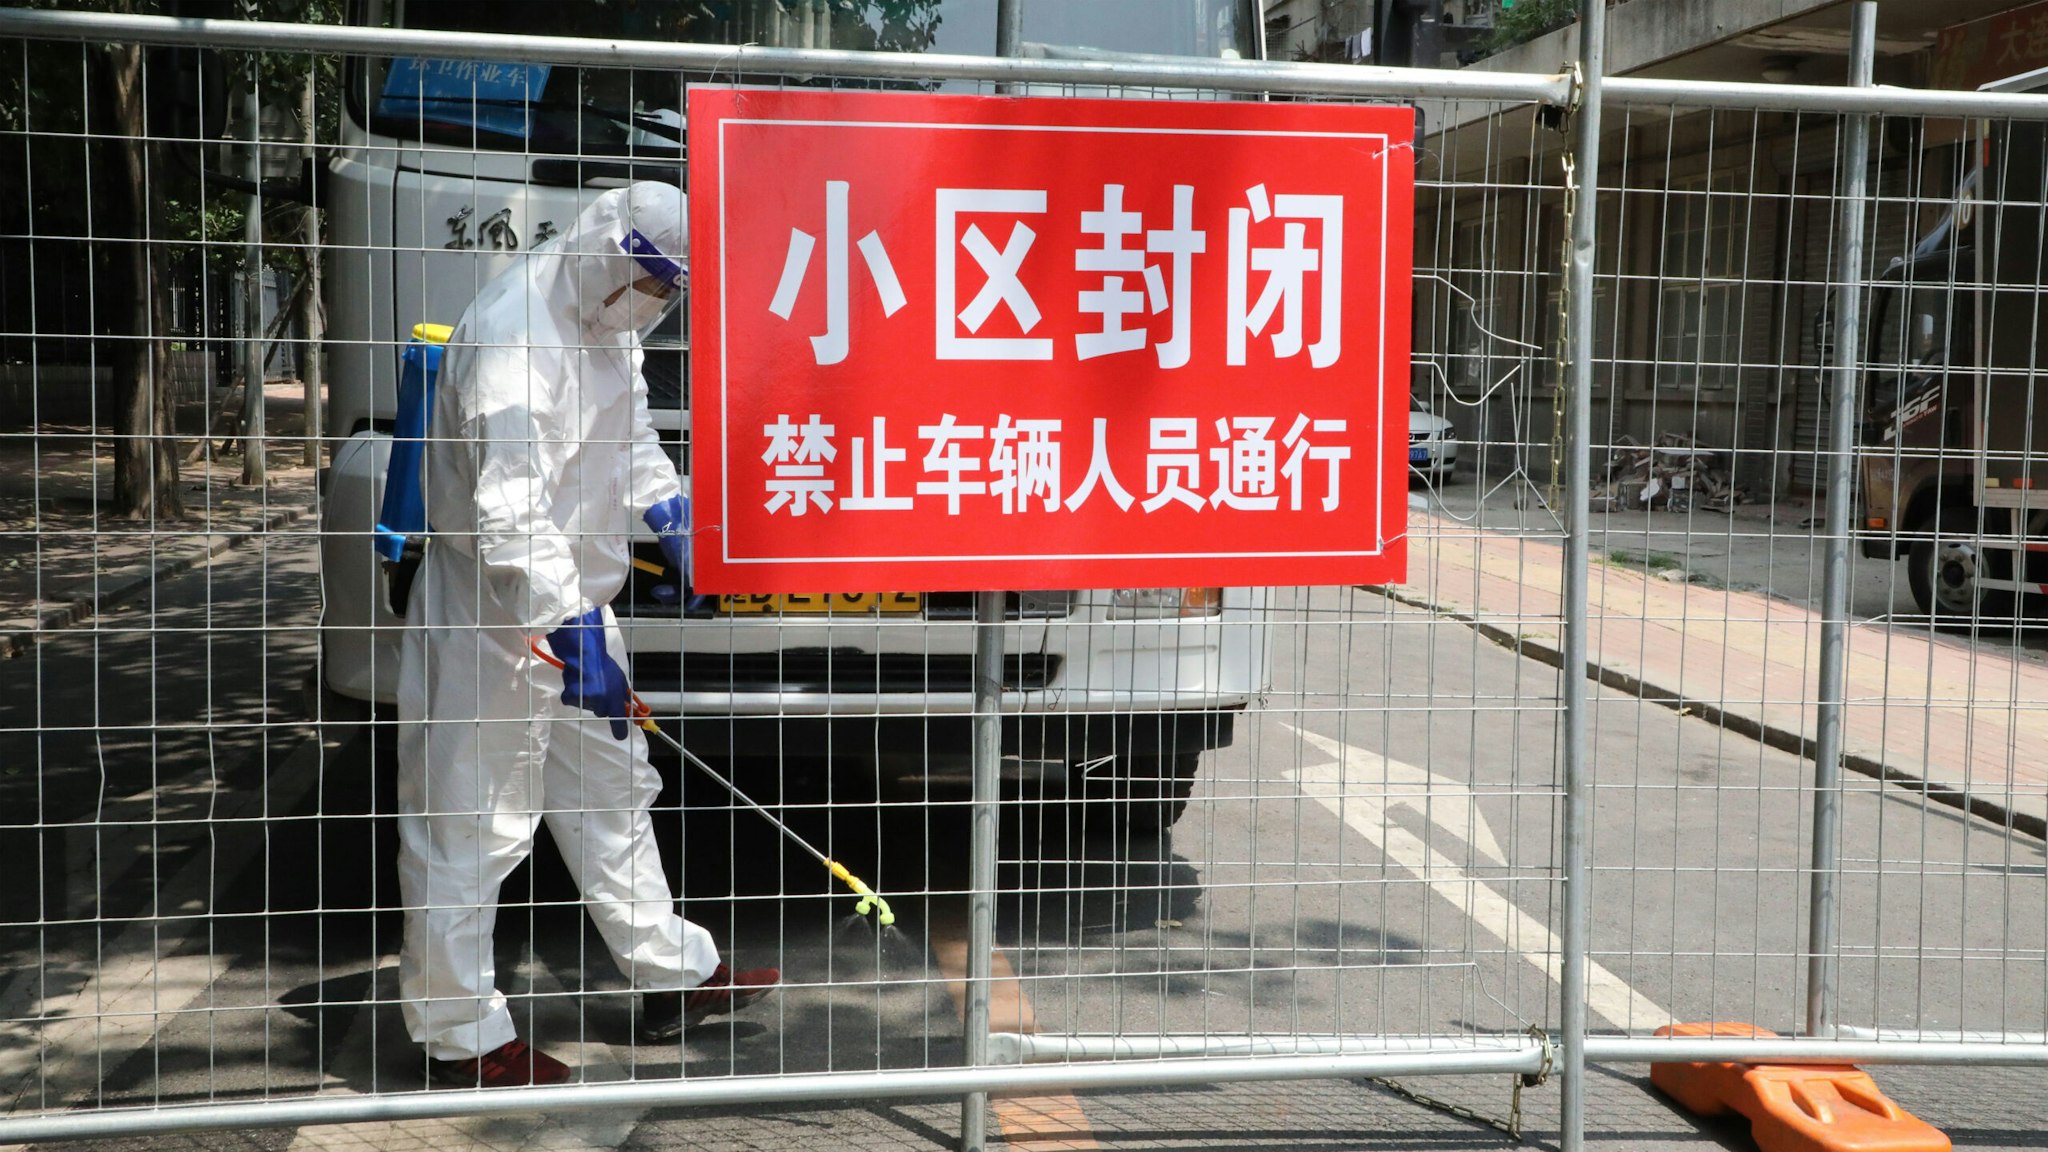 A worker wearing a protective suit sprays disinfectant at a closed residential community on July 29, 2020 in Dalian, Liaoning Province of China.